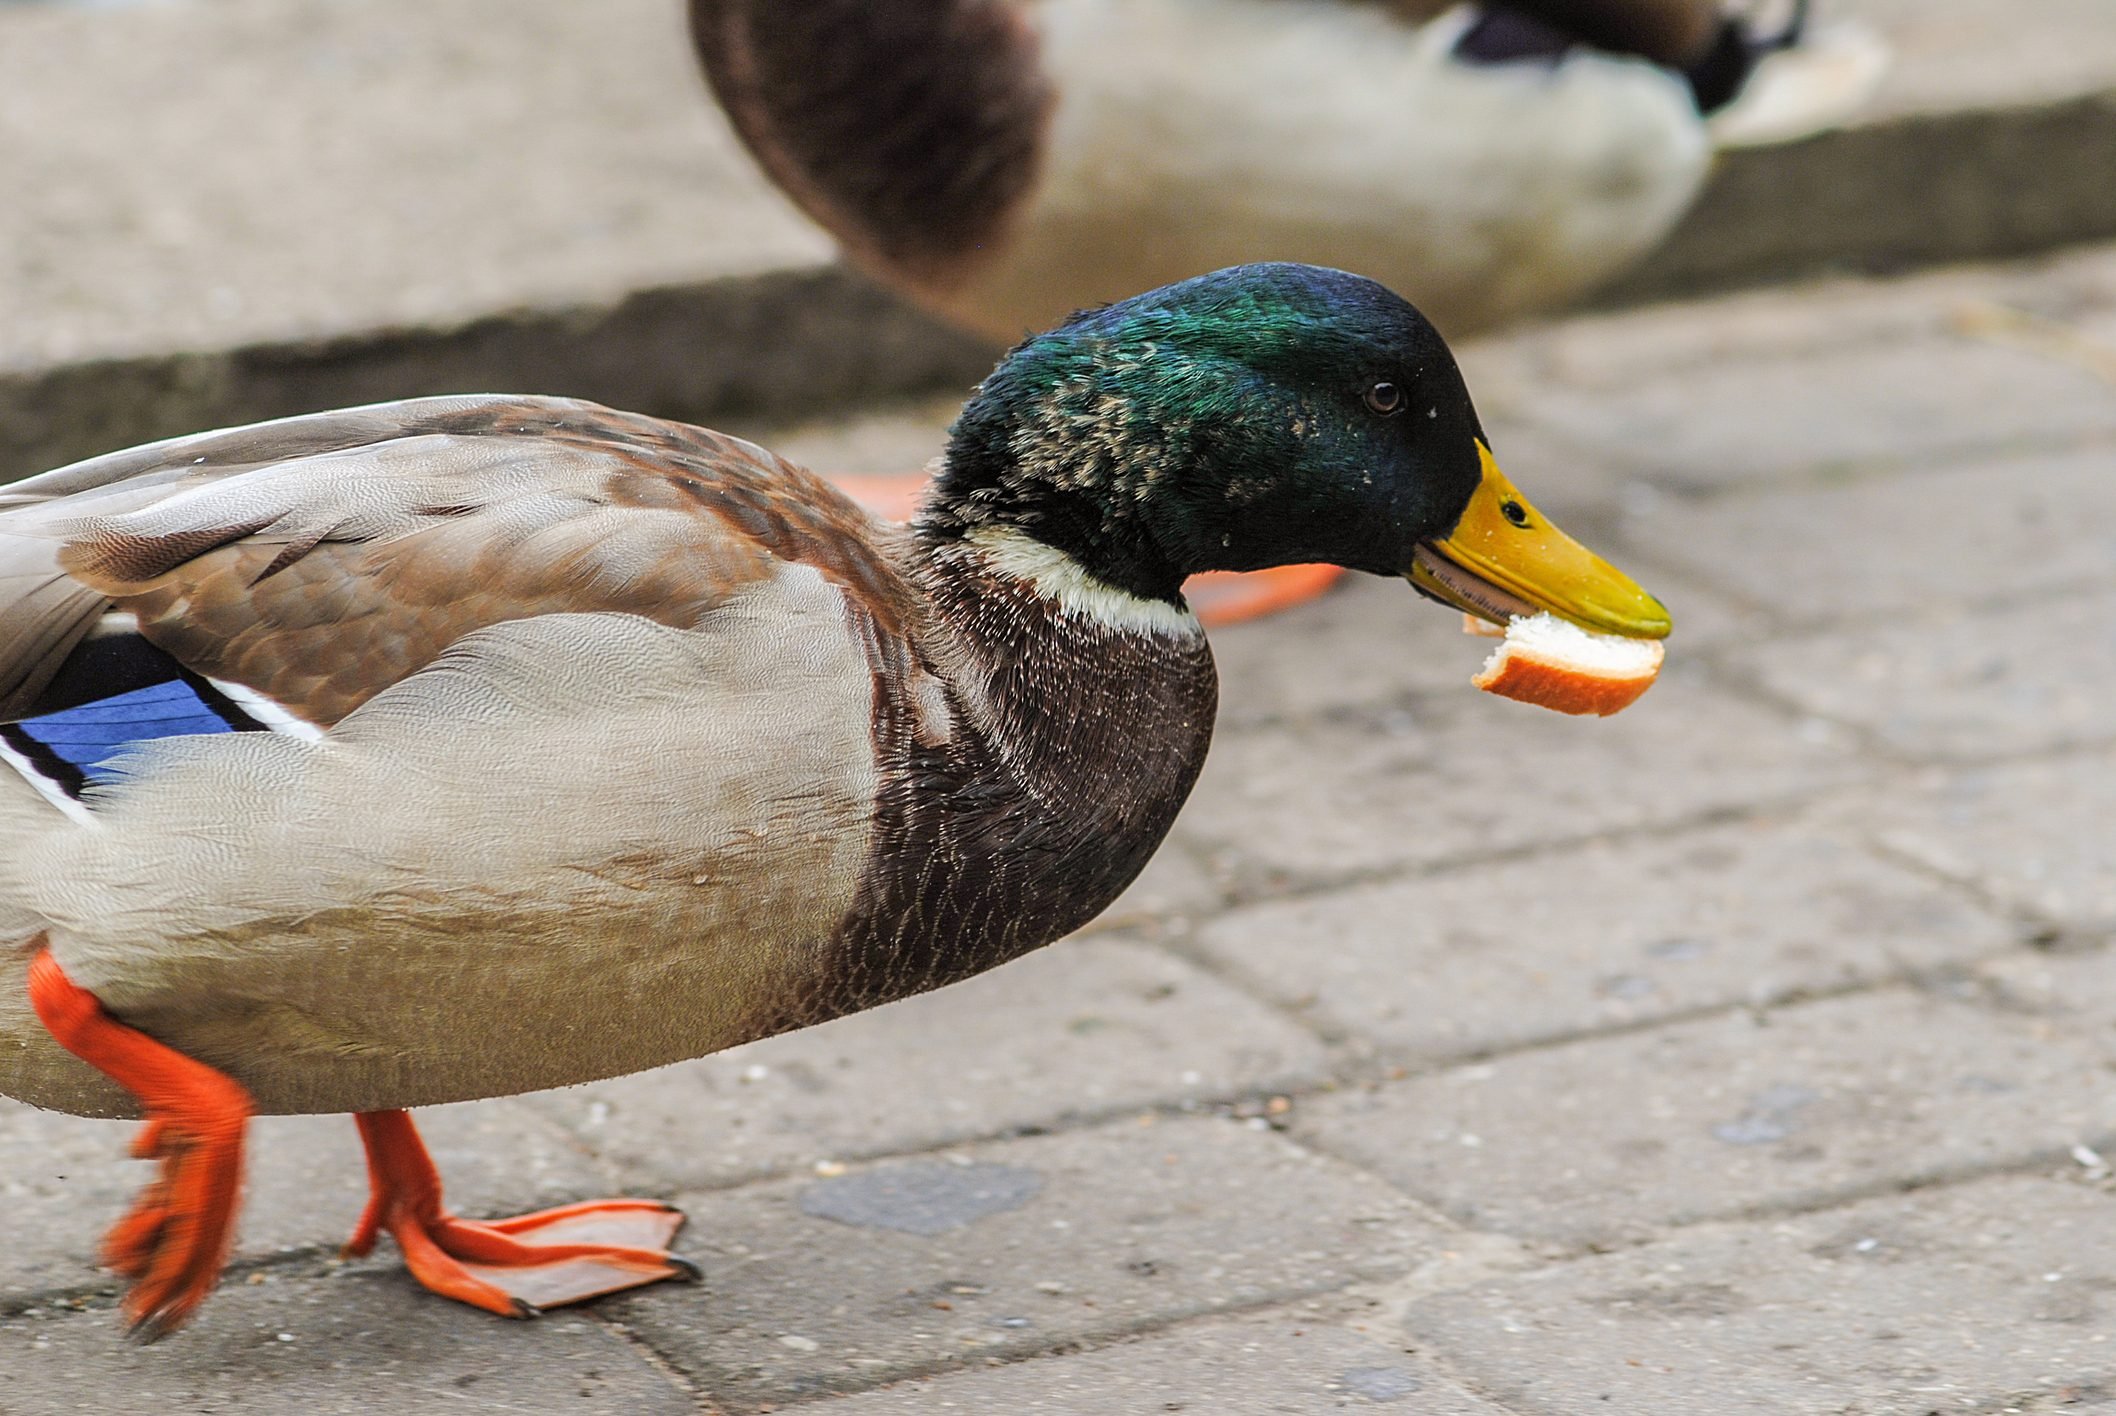 What Foods Can You Feed to Ducks?